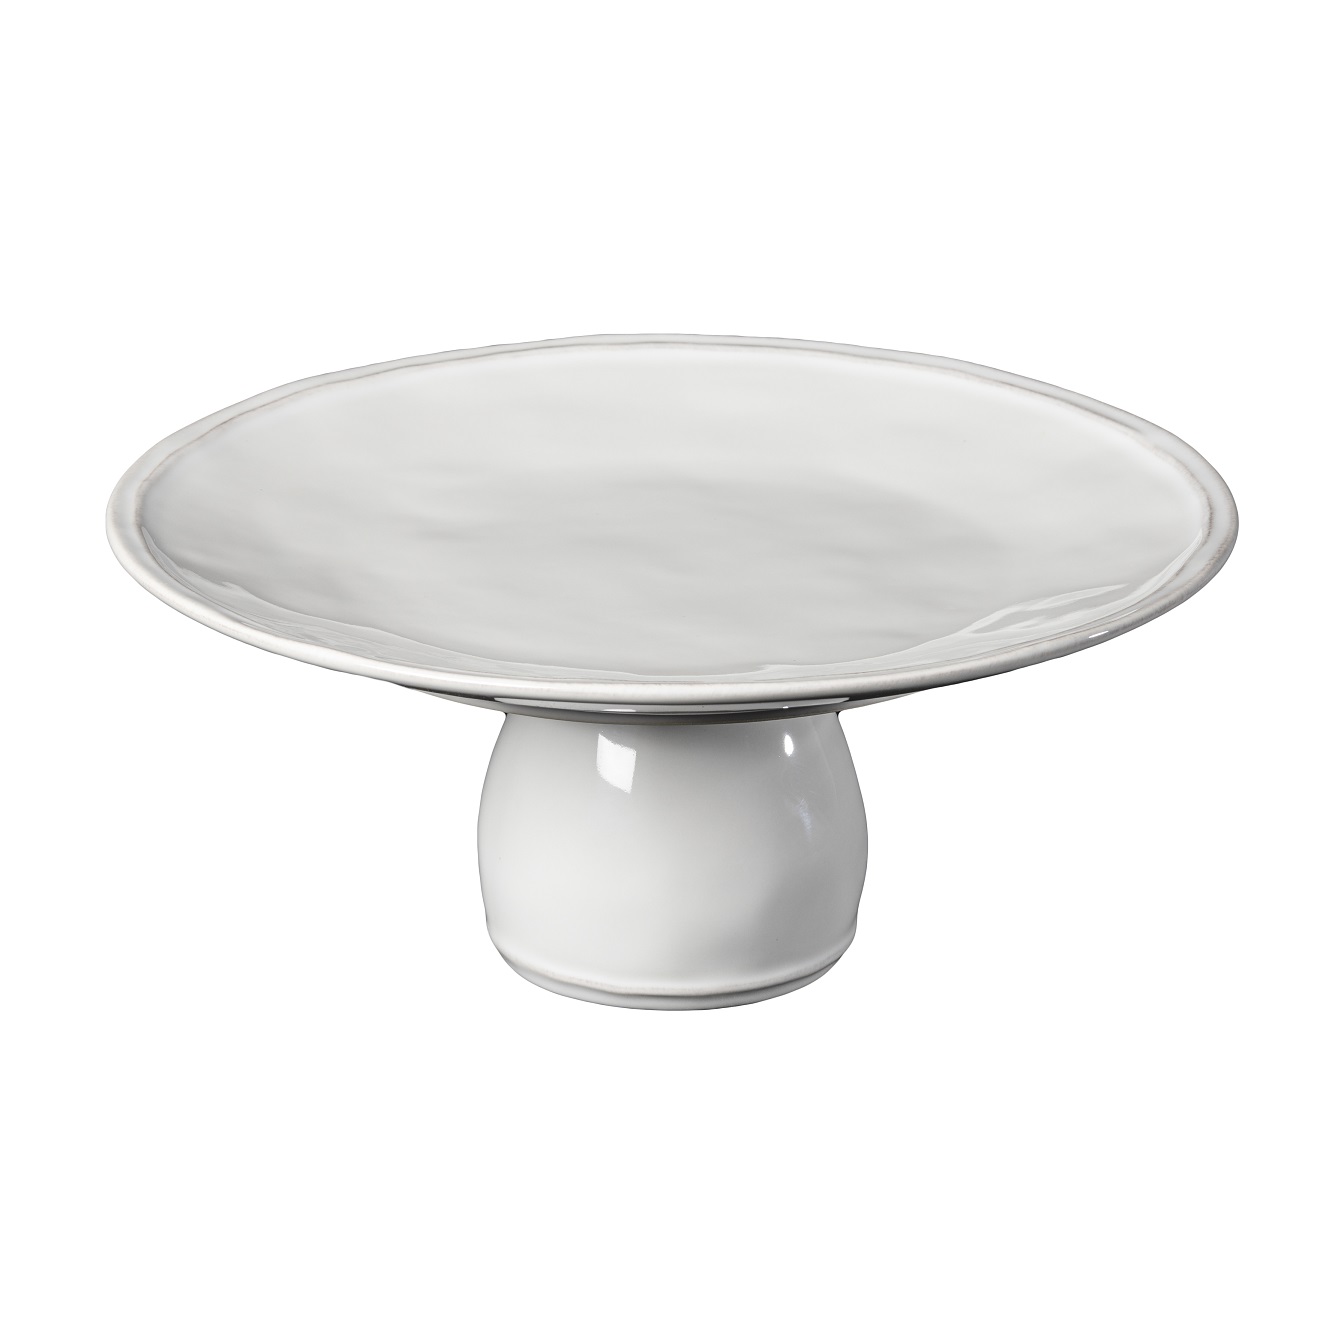 Fontana White Footed Plate 28cm Gift